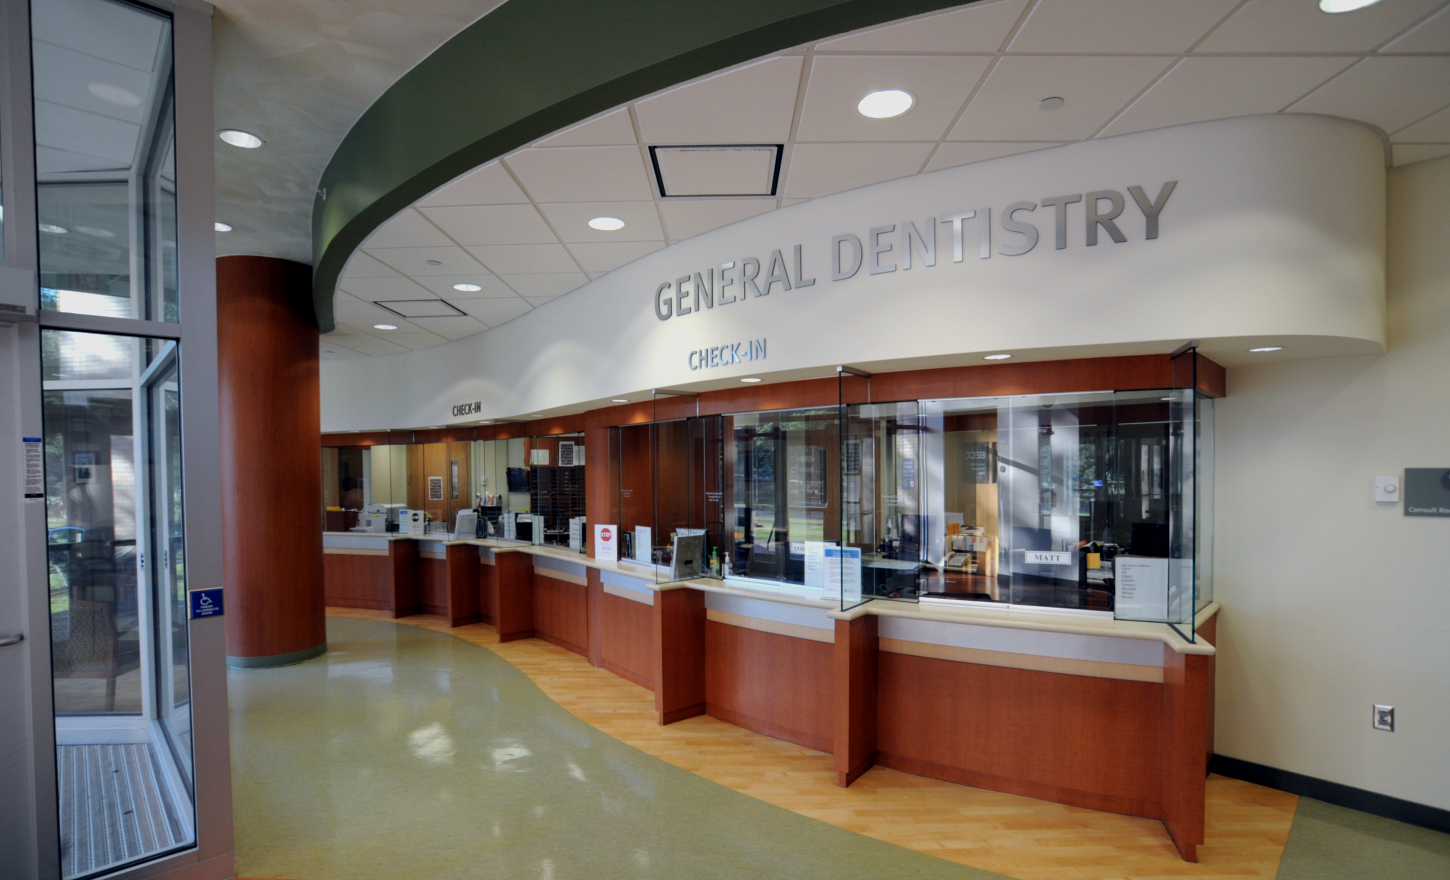 University of Rochester Medical Center Eastman Institute of Oral Health General Dentistry Renovation